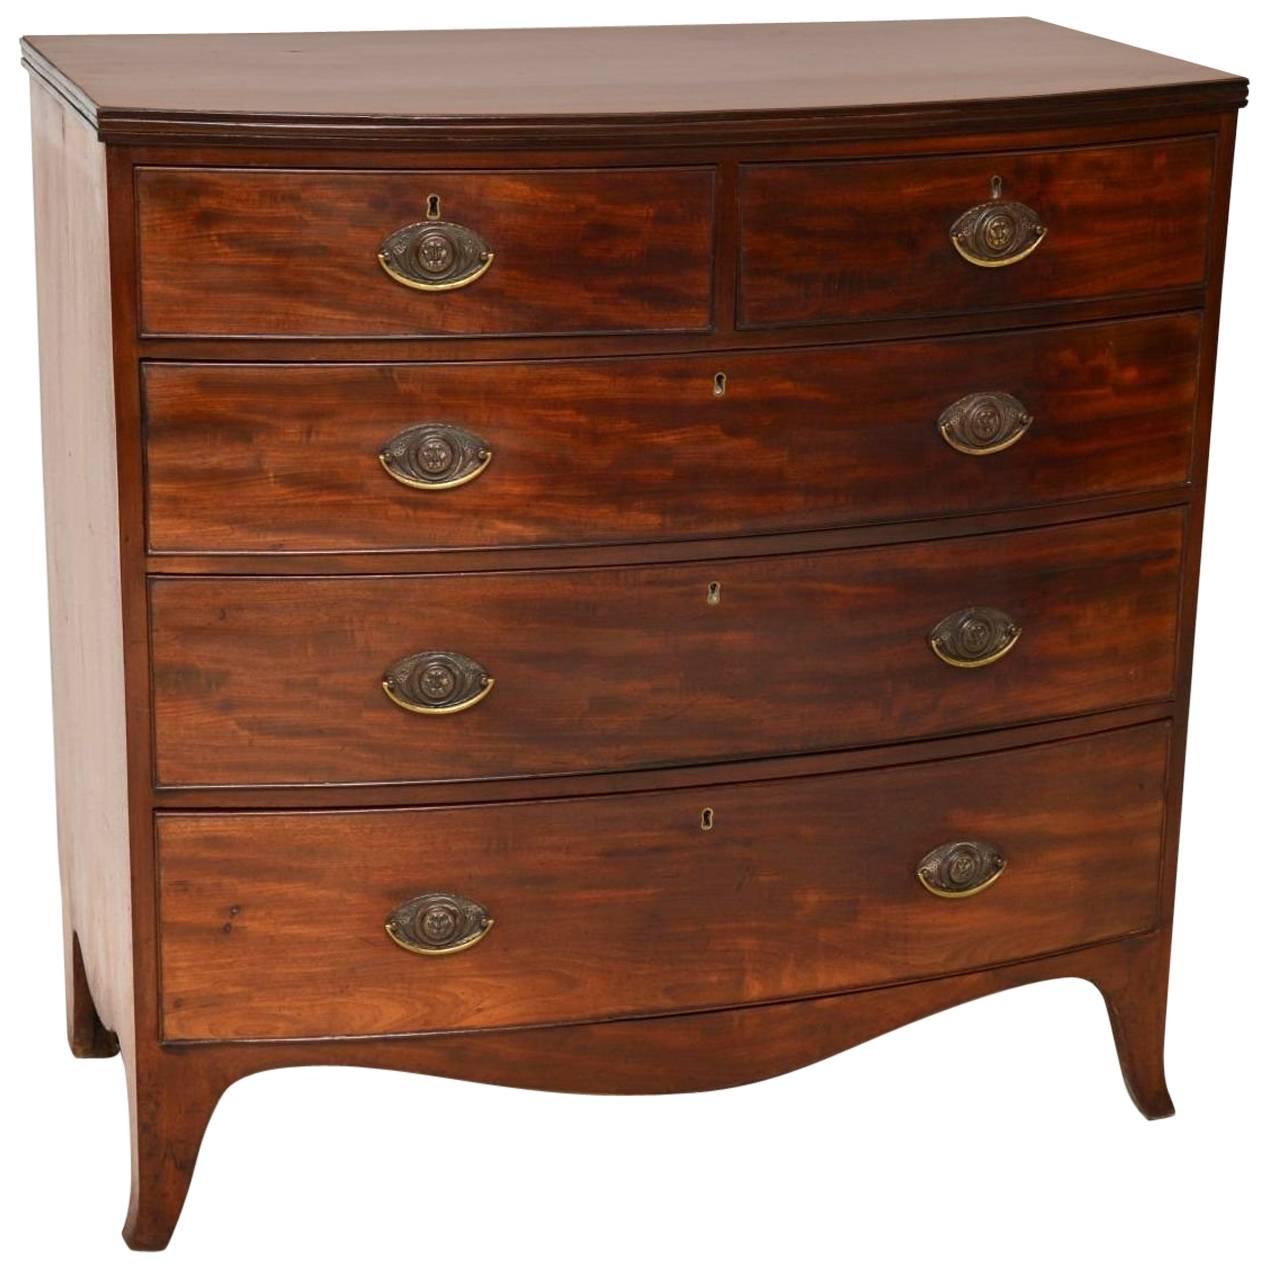 Antique Georgian III Mahogany Bow Fronted Chest of Drawers